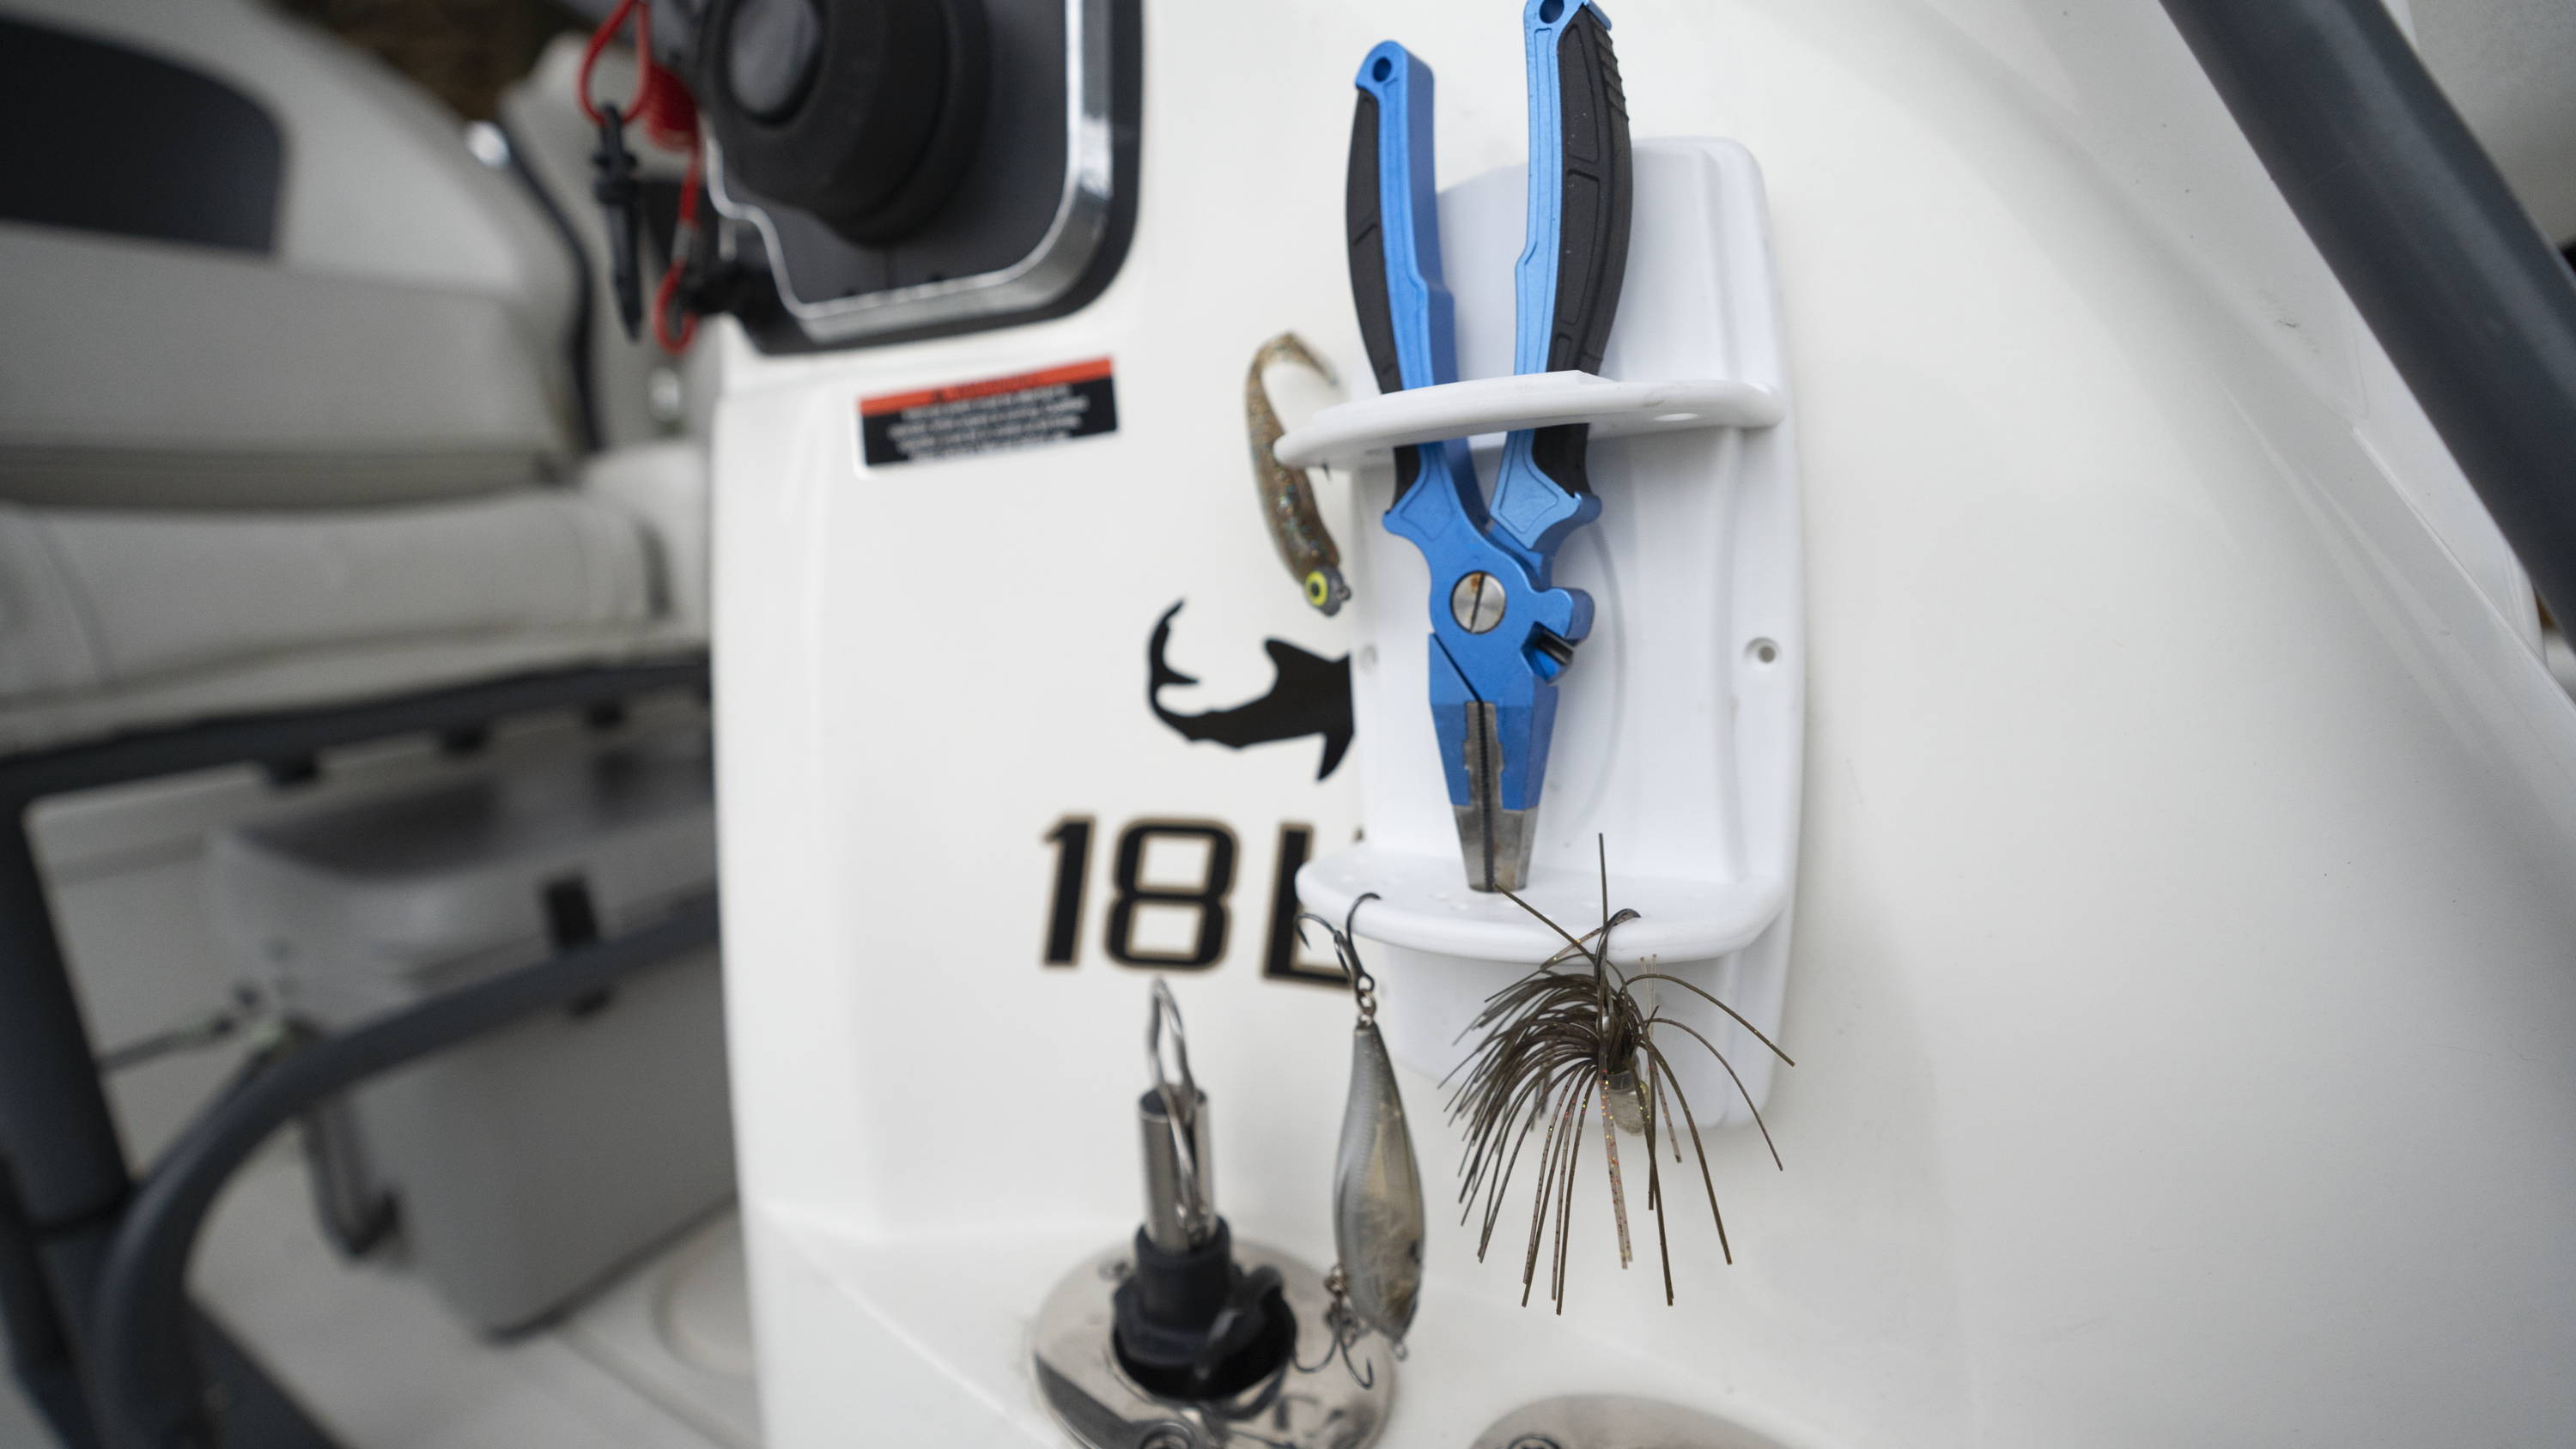 Onboard boat storage solutions from T-H Marine - keeping your boat safer and more organized